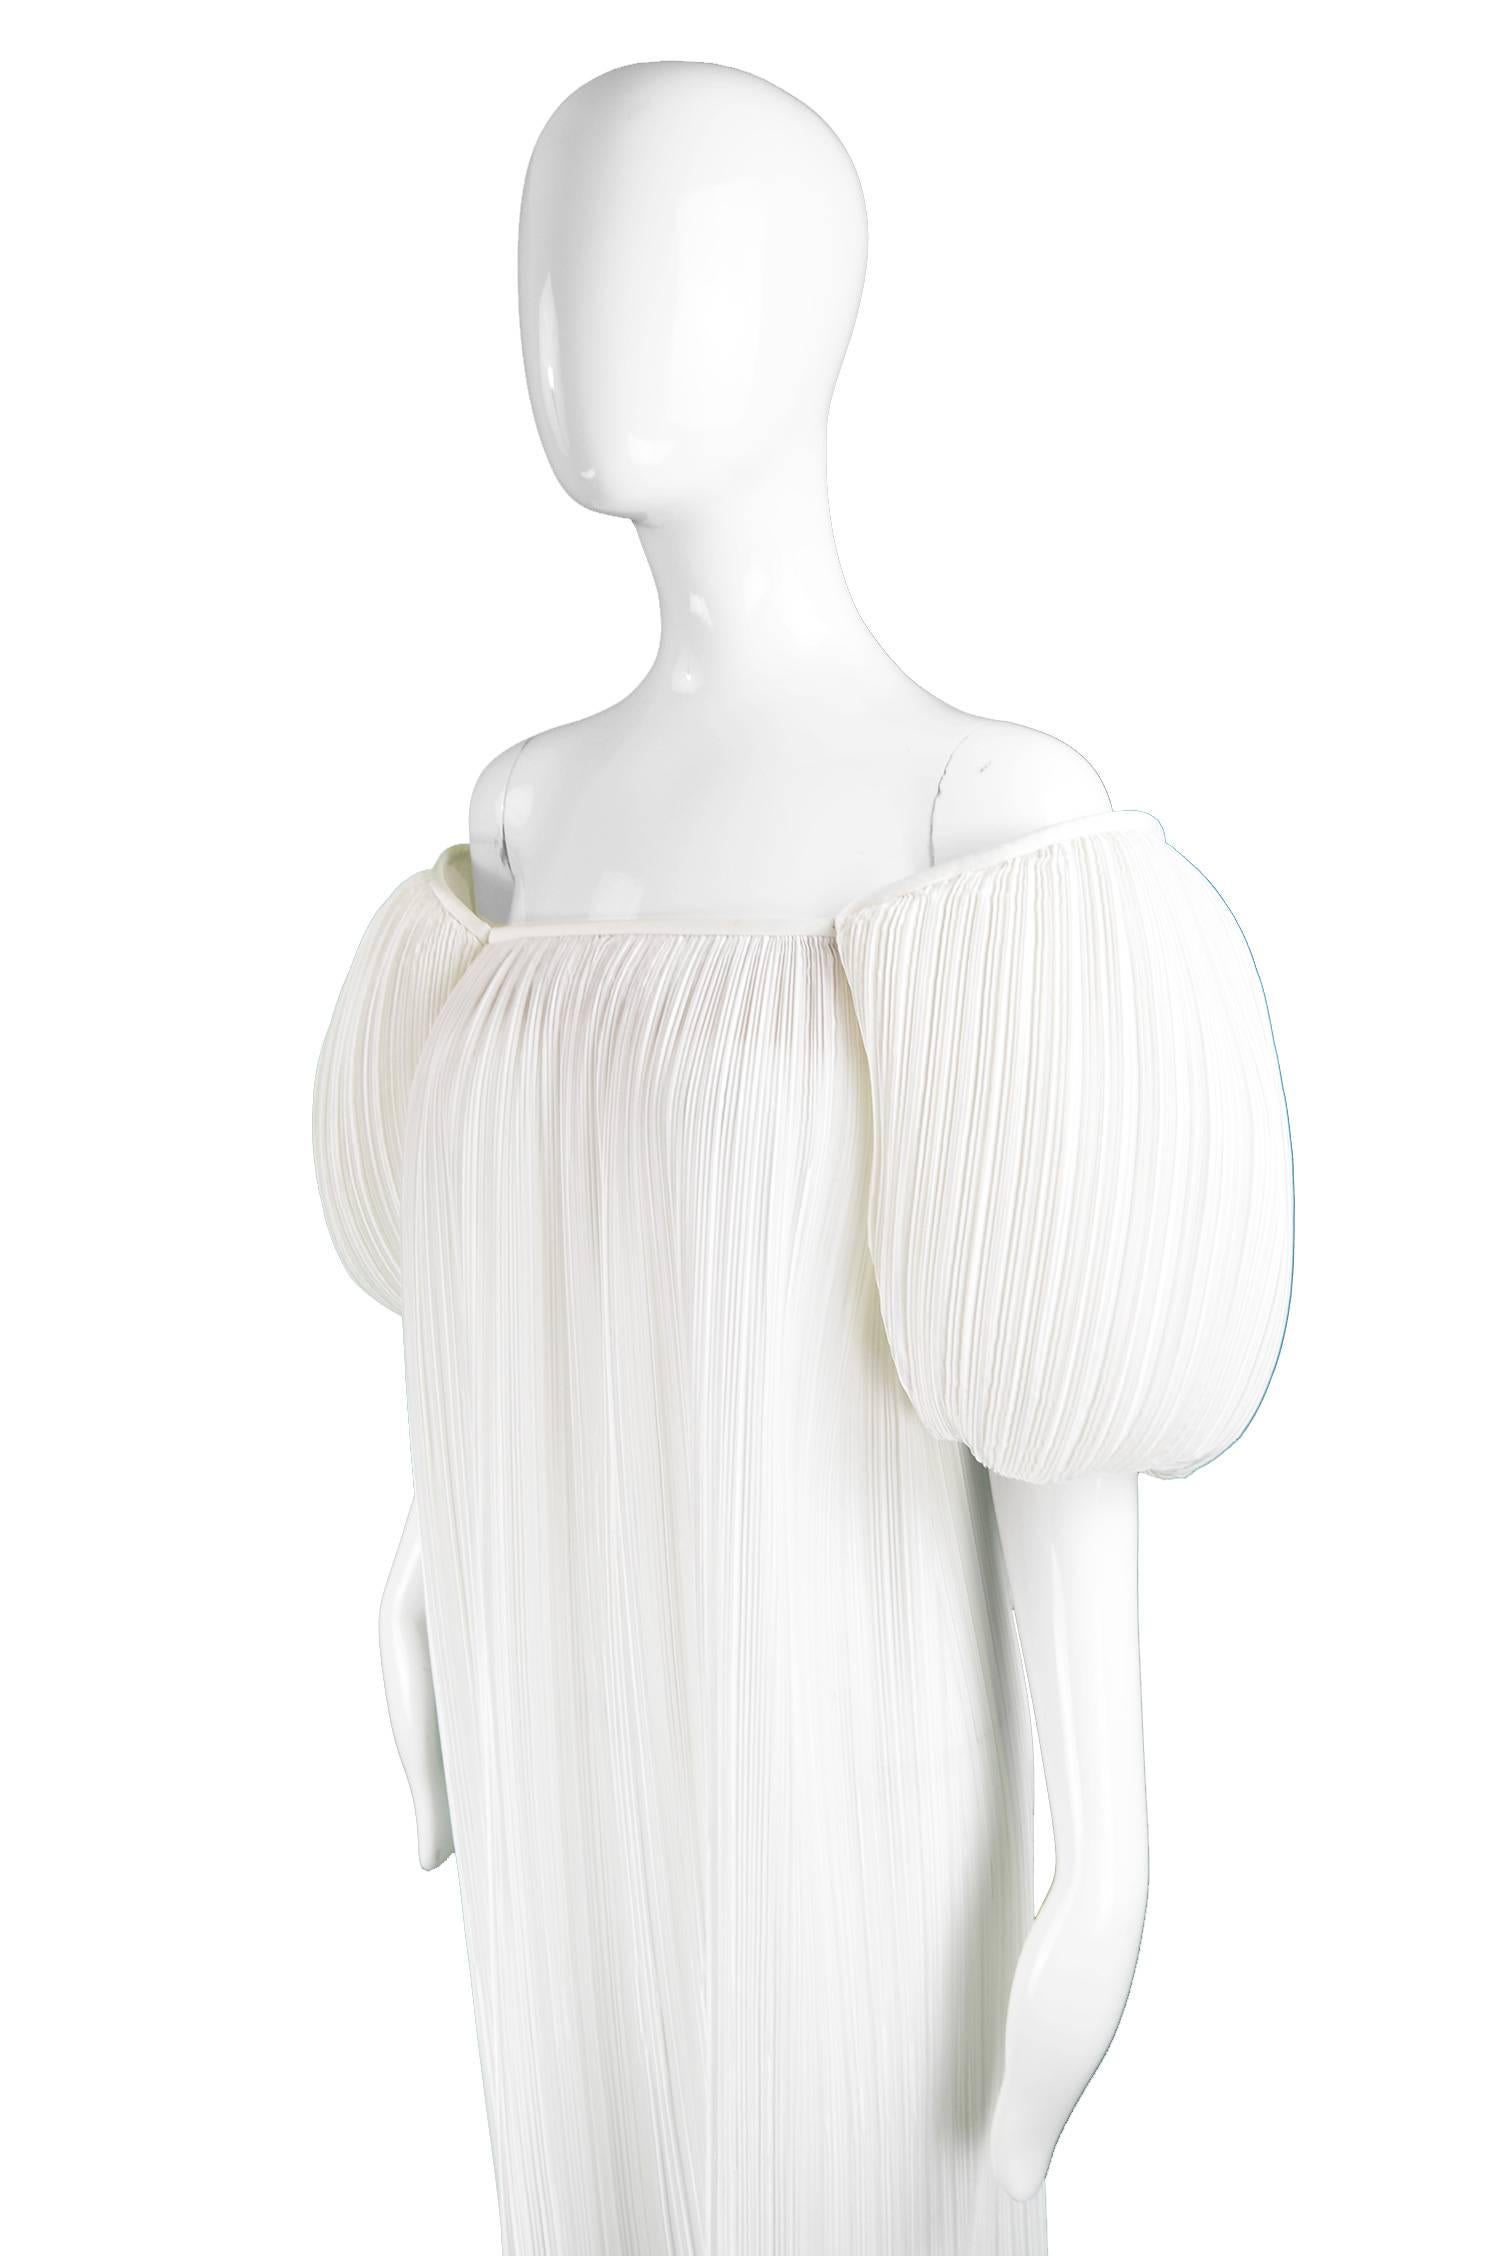 S.G. Gilbert for I. Magnin Ethereal White Vintage Fortuny Pleat Dress, 1980s In Excellent Condition In Doncaster, South Yorkshire